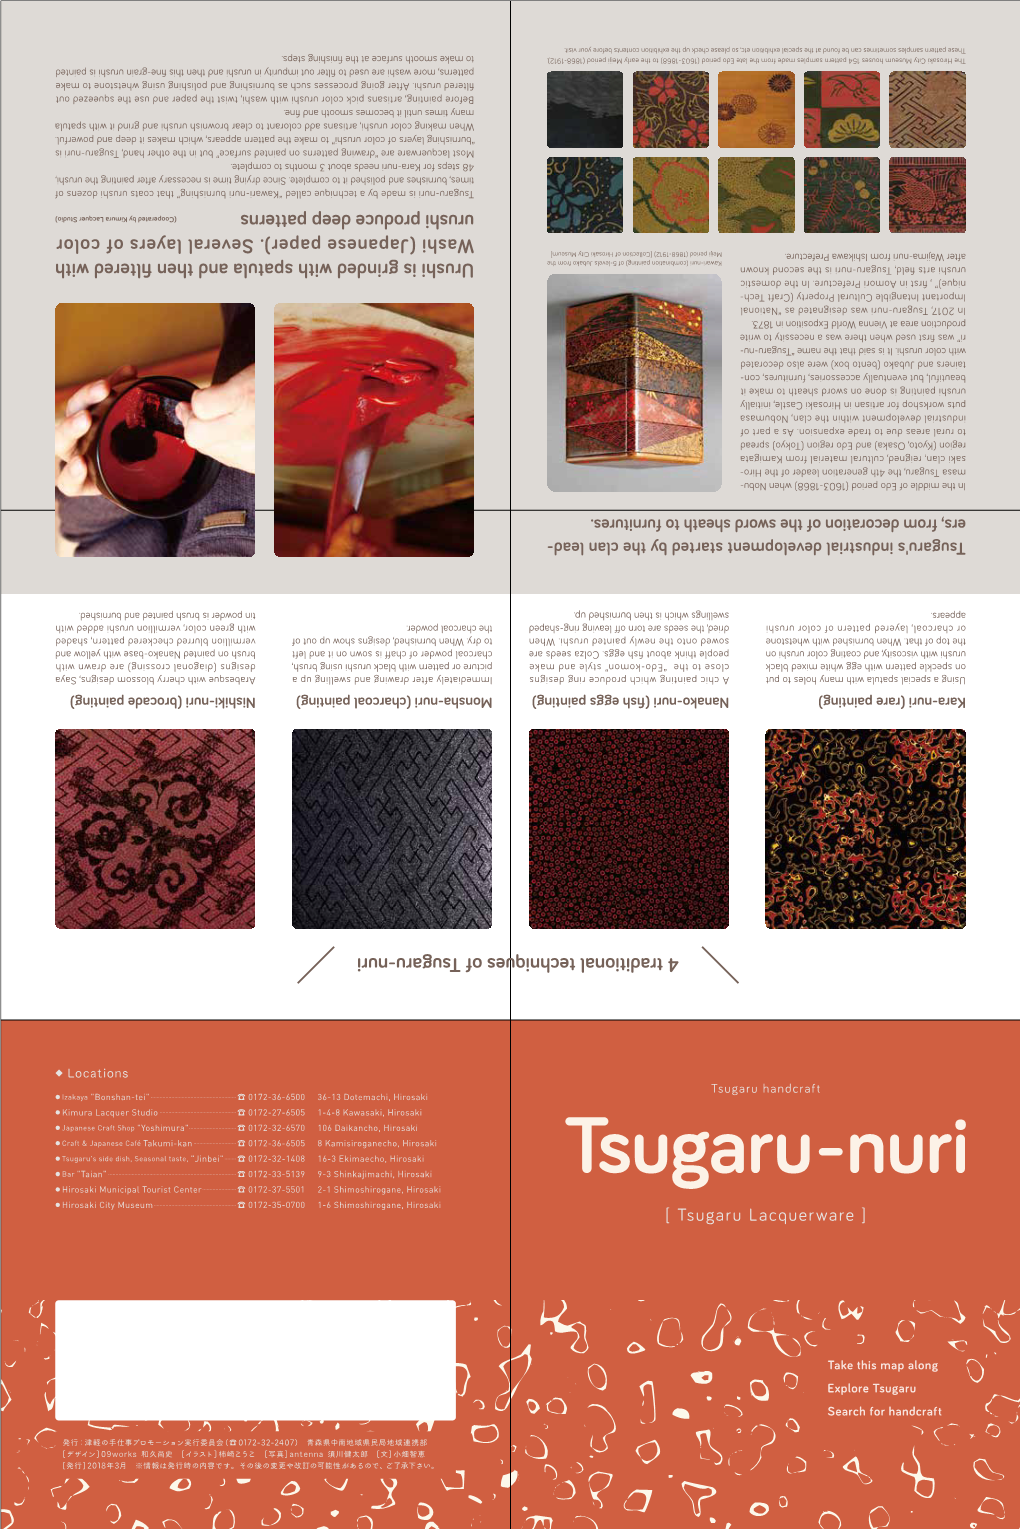 Tsugaru-Nuri Is Is Tsugaru-Nuri Hand, Other the in but Surface” Painted on Patterns “Drawing Are Lacquerware Most